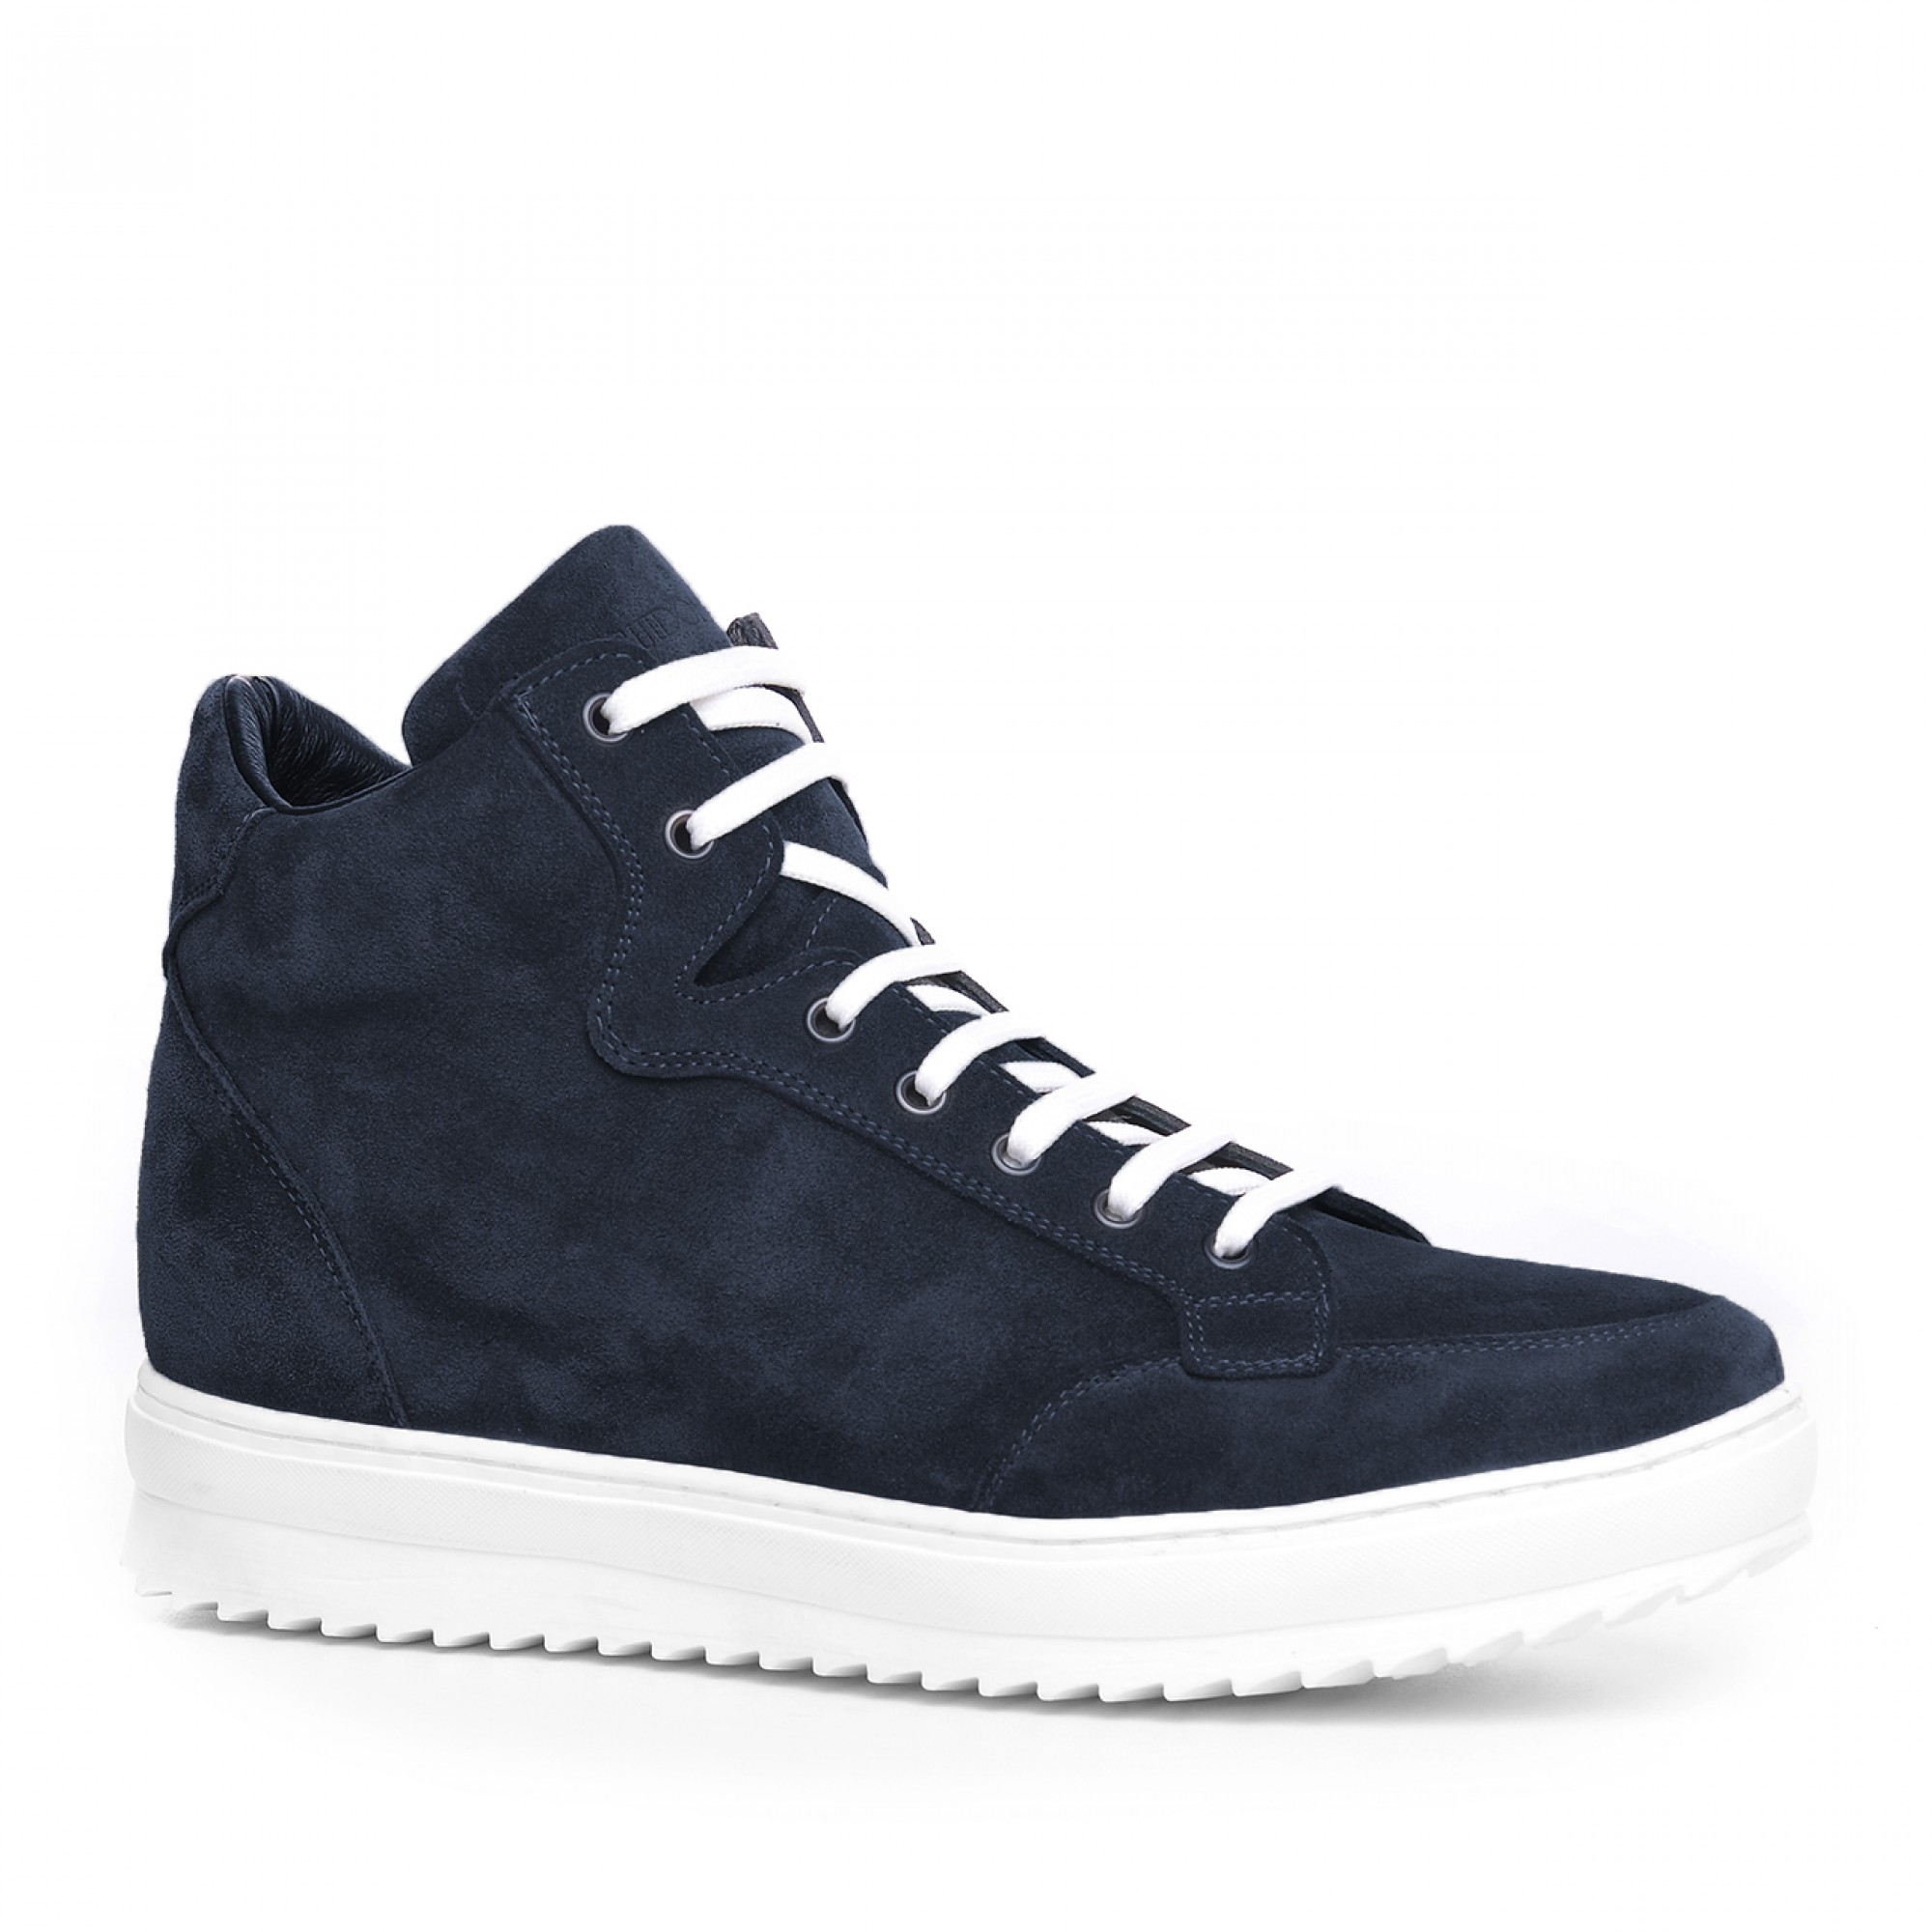 Wyoming - Elevator Sneakers in Suede Leather from 2.4 to 4 inches